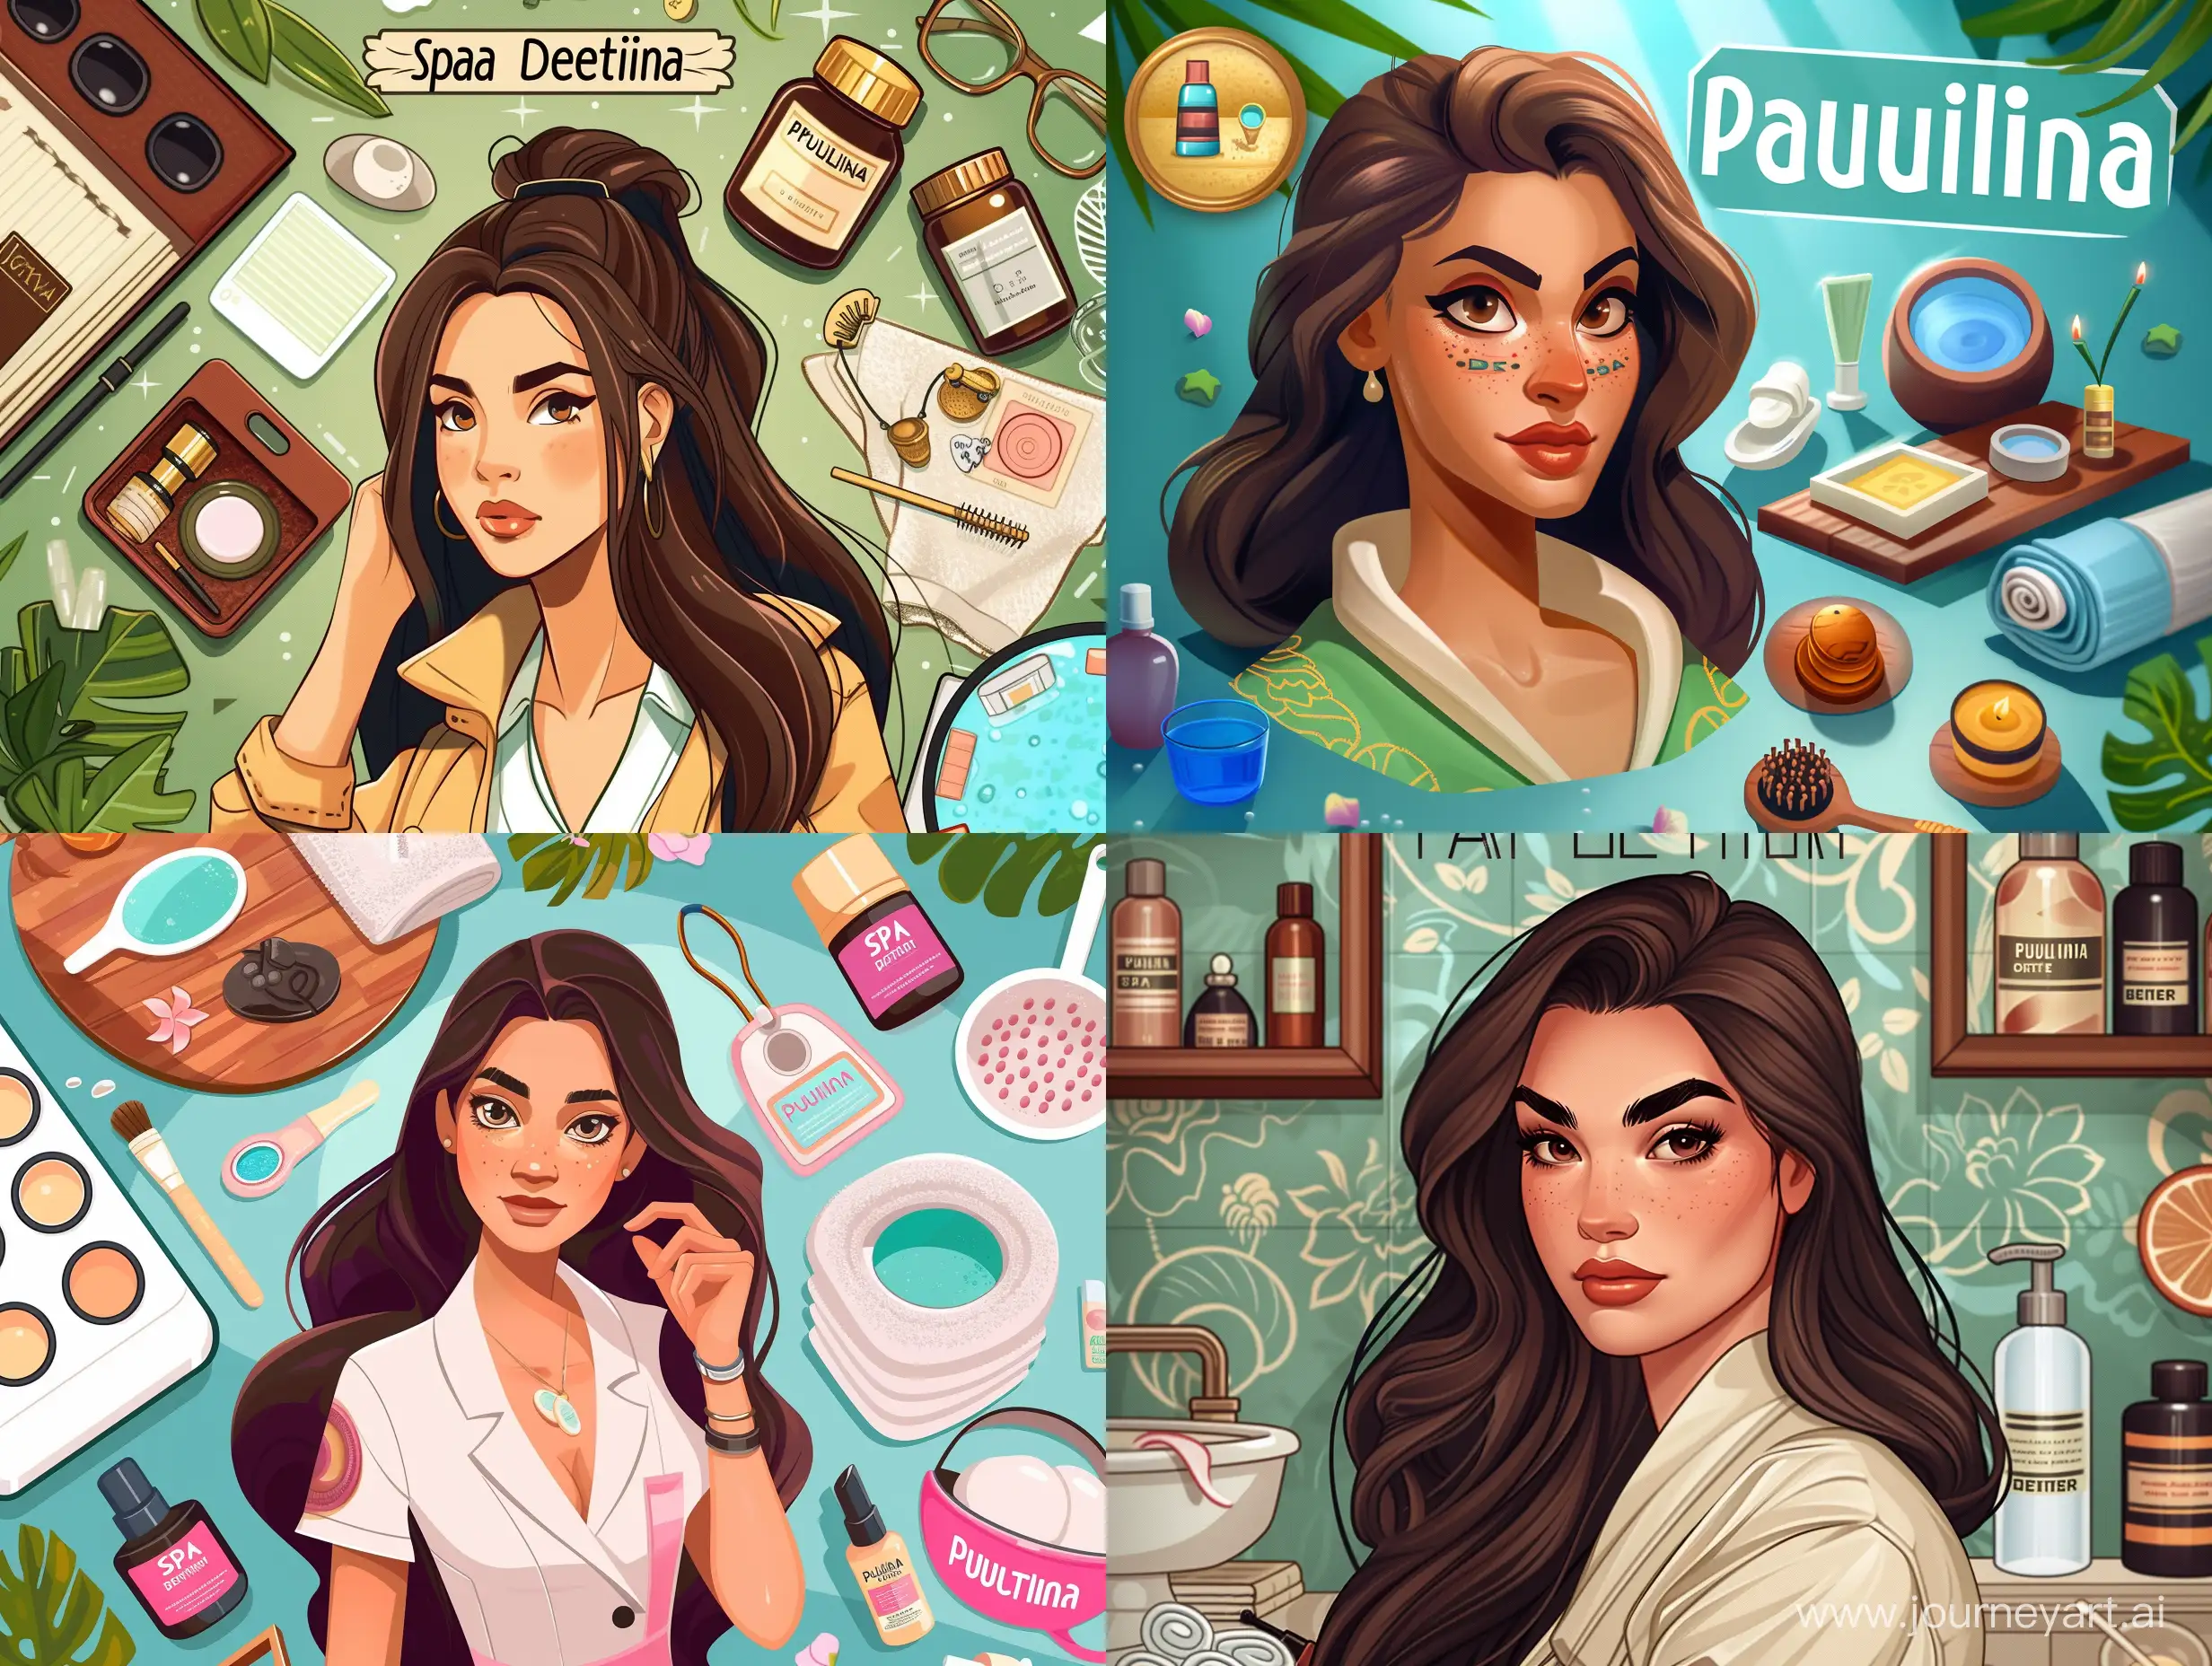 "Create a cover image for an interactive Instagram game called 'spa Detective.' The main character is a brunette detective with long hair named Paulina. Include objects on the image that clearly indicate it's a detective game focused on spa."